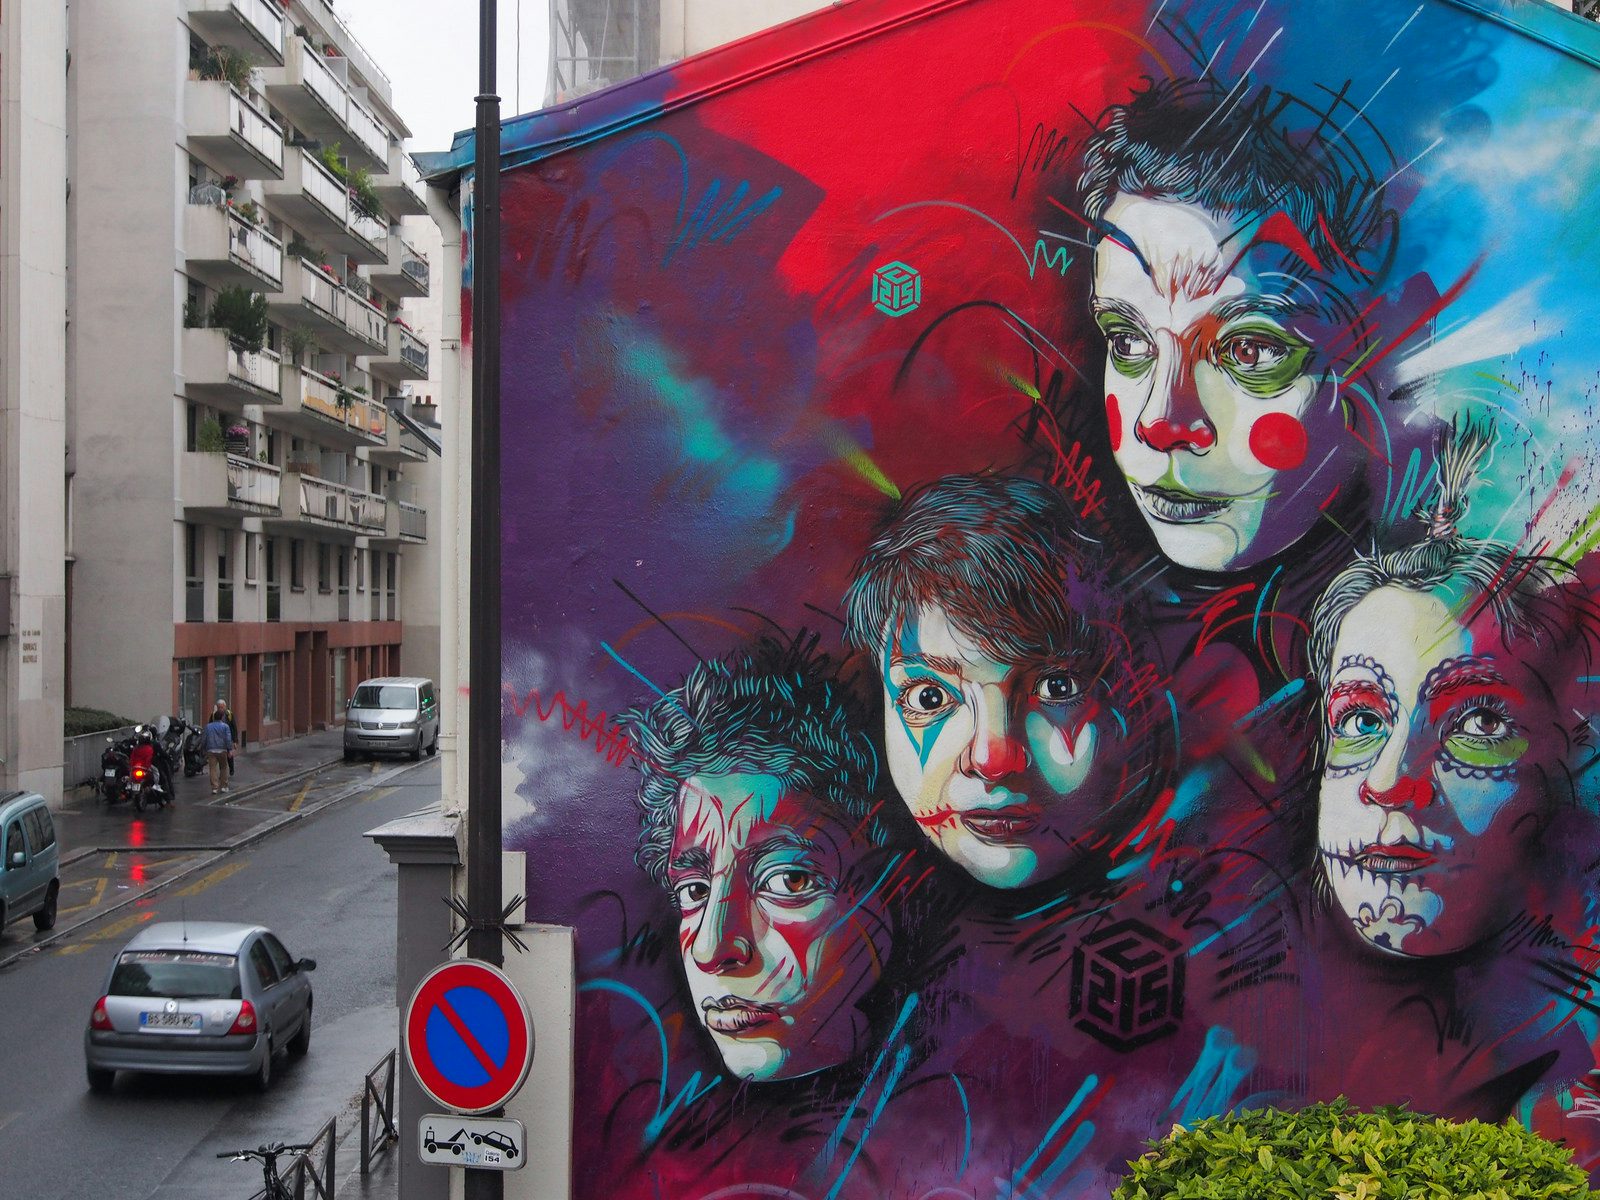 Catching up with C215